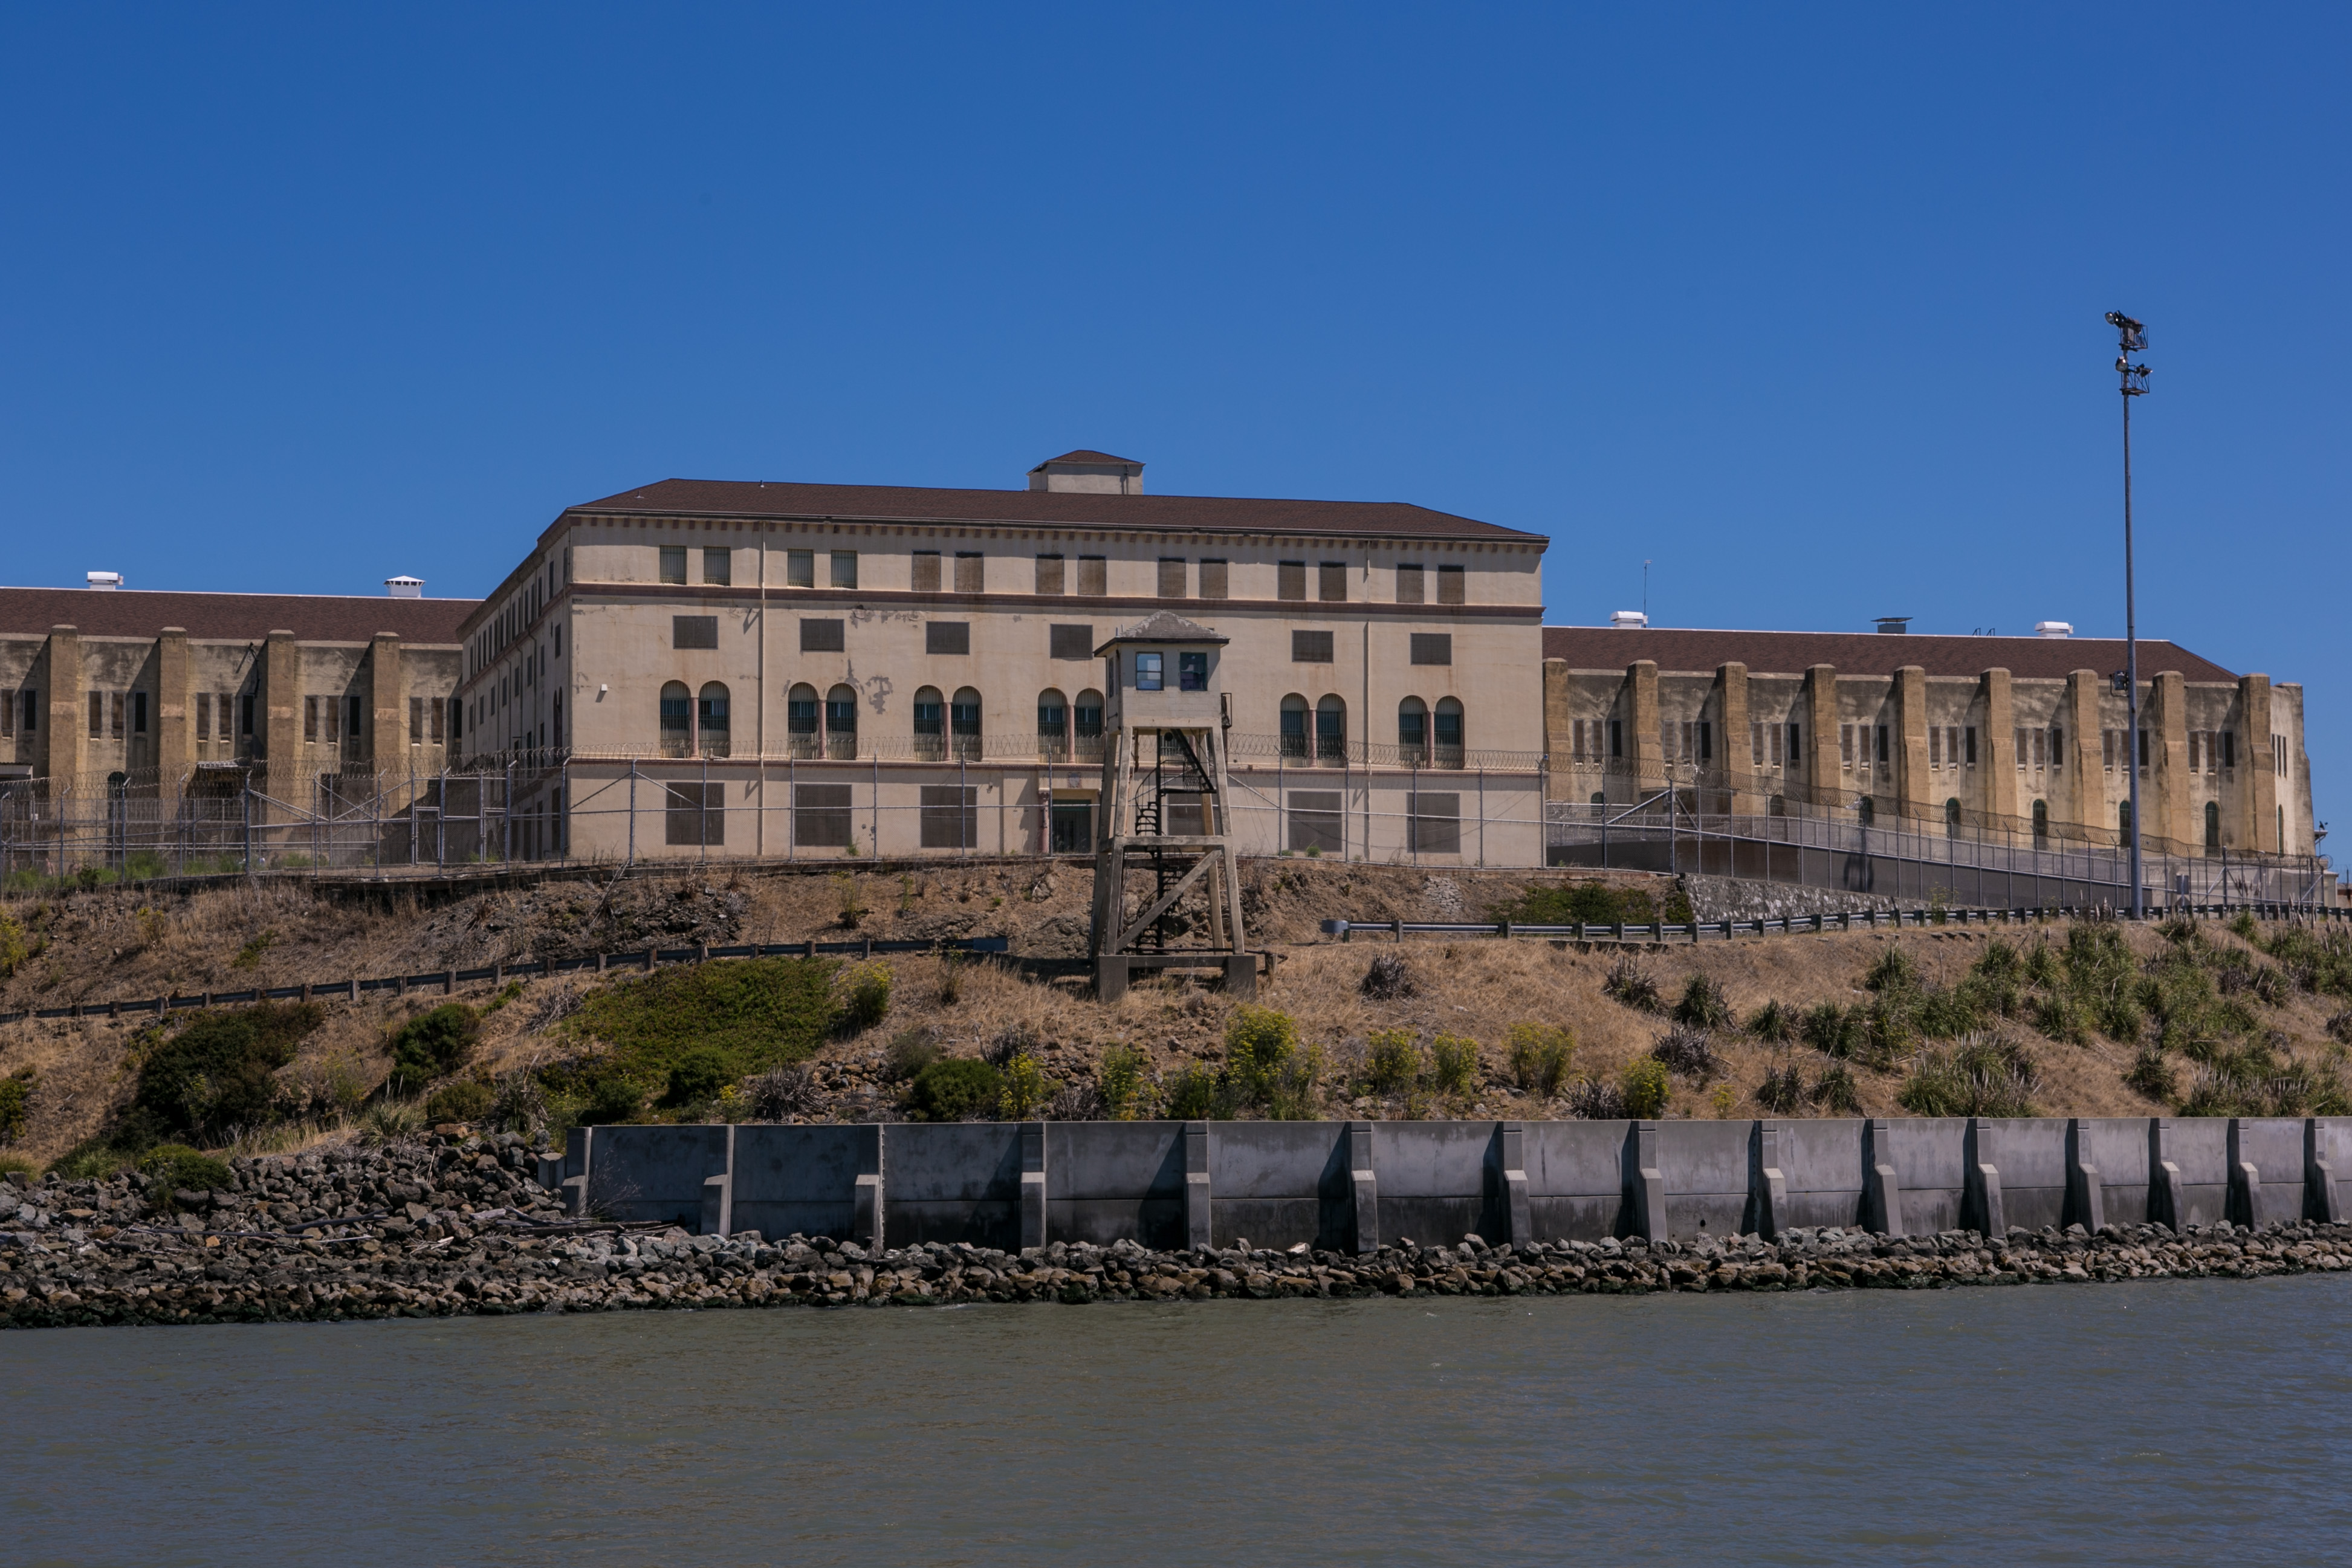 San Quentin Prison shown on July 10, 2013, in Larkspur, Califo. (George Rose—Getty Images)